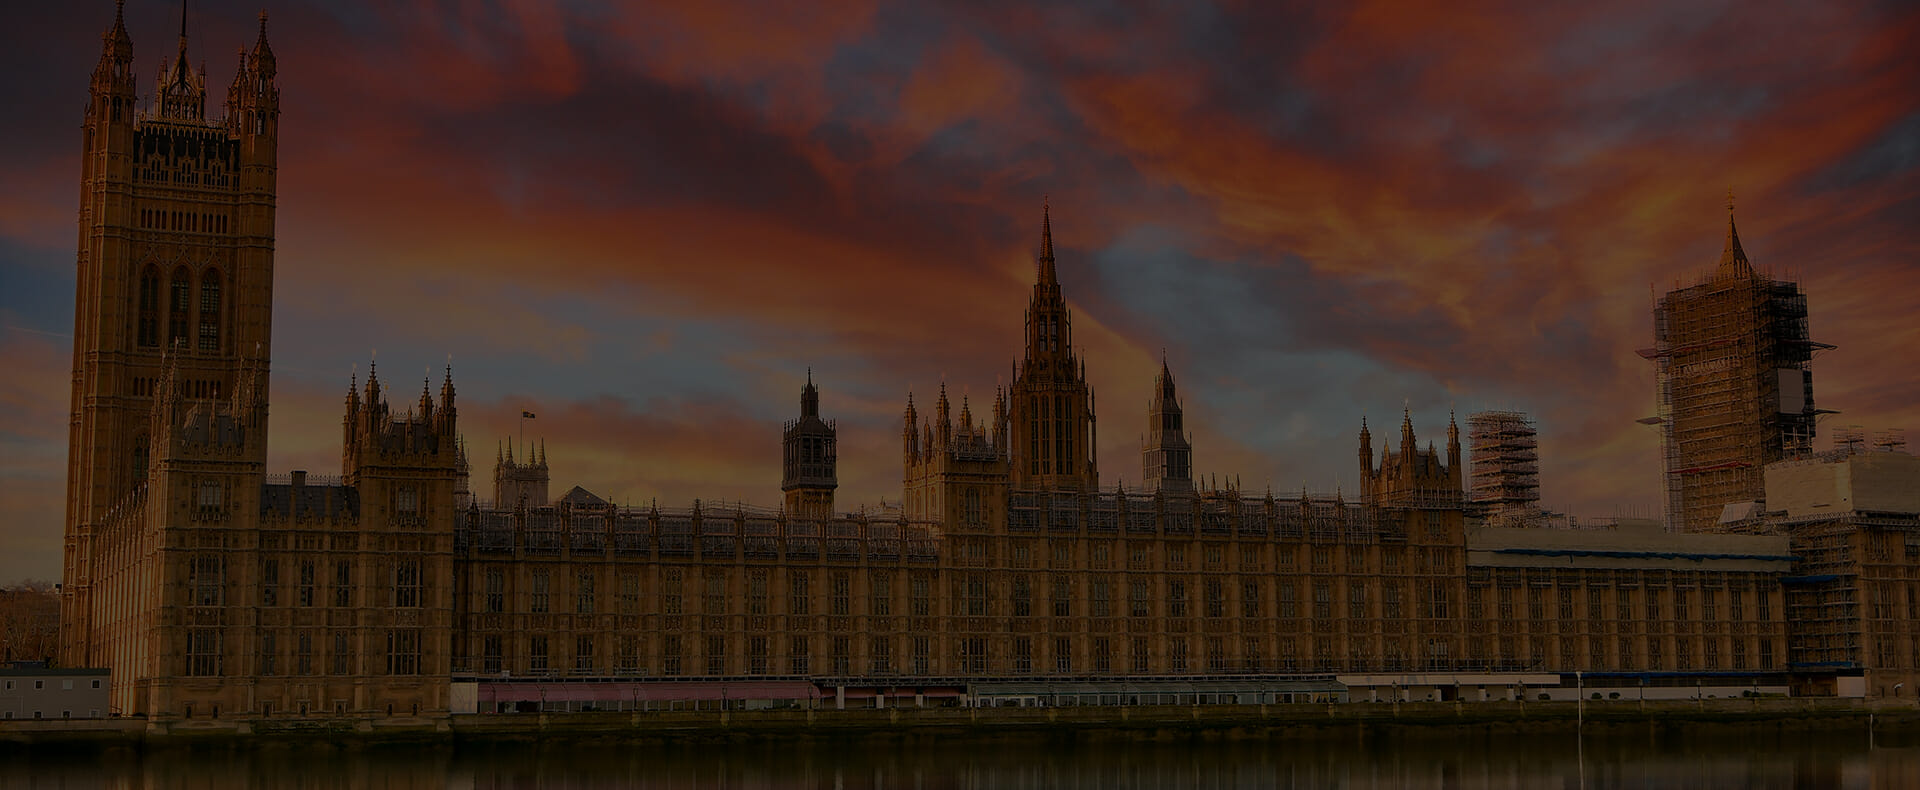 london houses of parliament with red sky and big ben in background